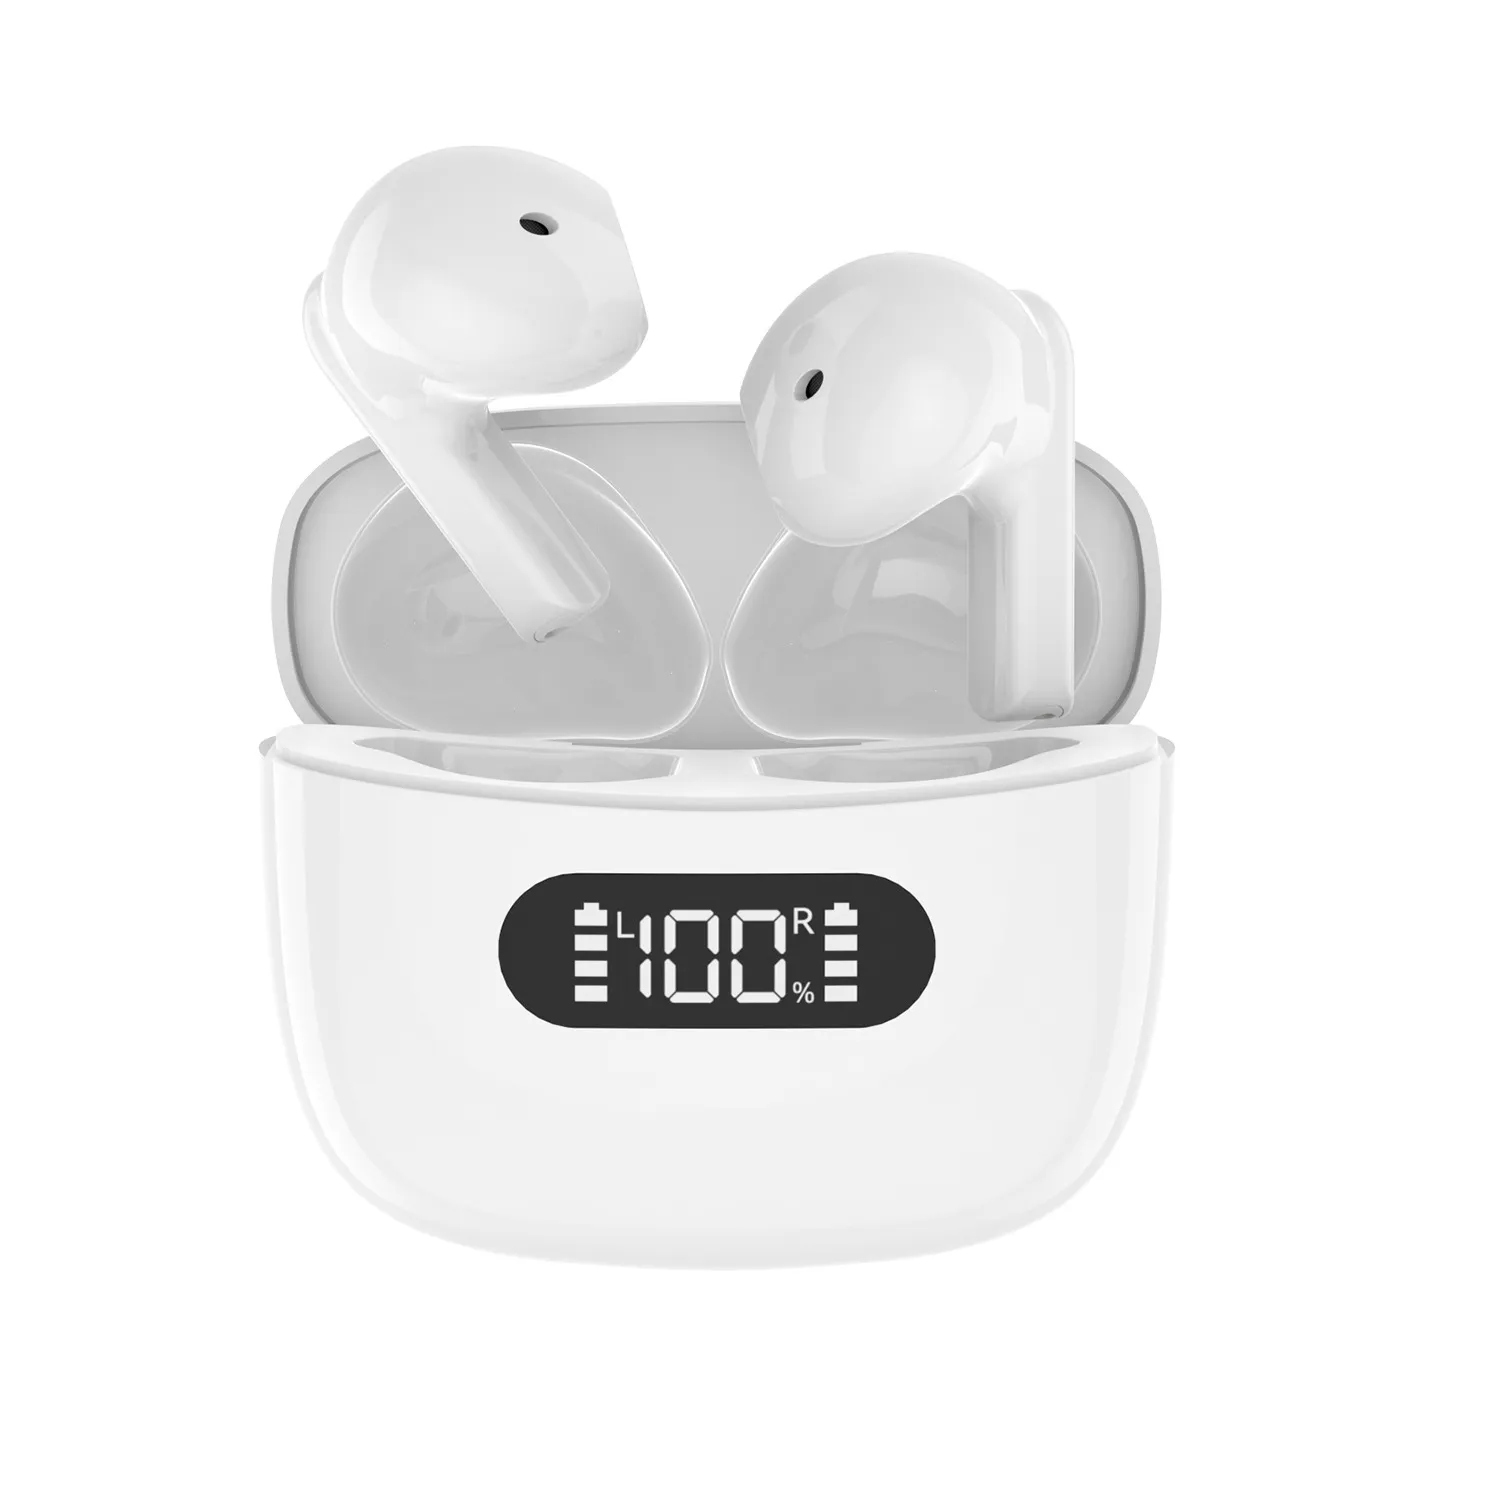 Wireless Earbuds Bluetooth 5.3 Headphones LED Power Display Earbuds Hi-Fi Stereo Sound Deep Bass Crystal-Clear Calls Headset with Charging Case